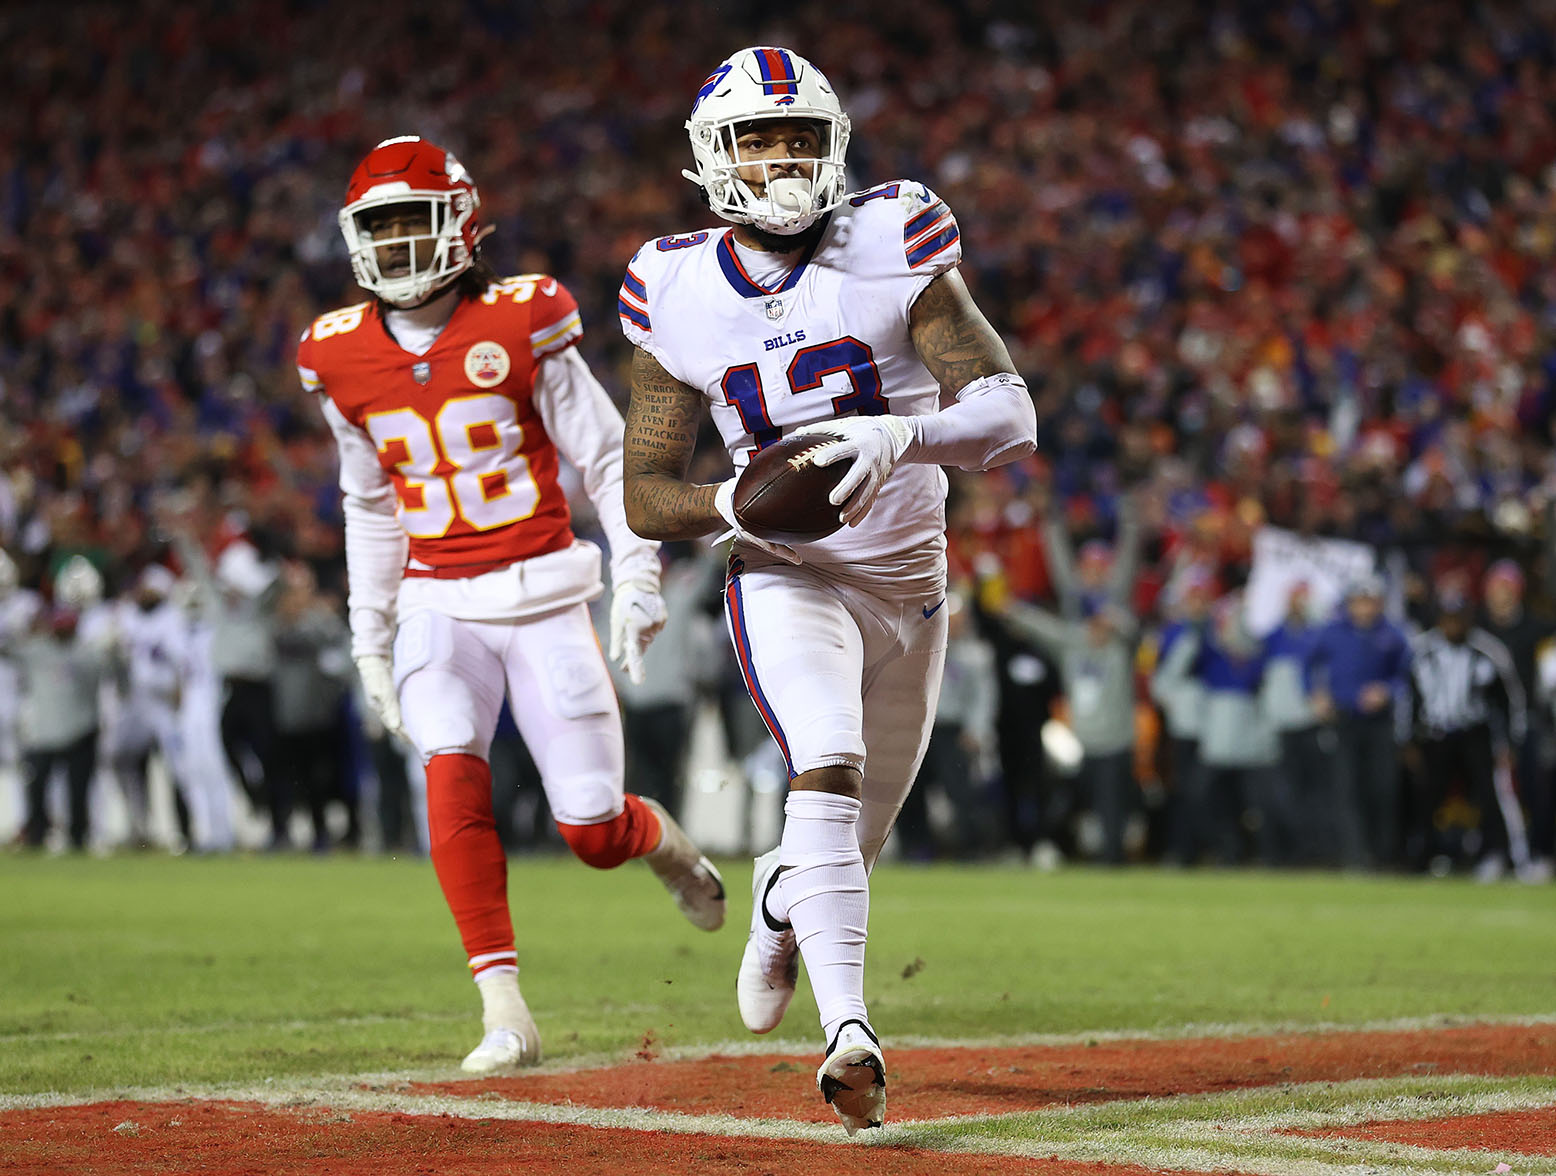 KANSAS CITY, MISSOURI - JANUARY 23: Gabriel Davis #13 of the Buffalo Bills celebrates after scoring a 75 yard touchdown against the Kansas City Chiefs during the fourth quarter in the AFC Divisional Playoff game at Arrowhead Stadium on January 23, 2022 in Kansas City, Missouri. (Photo by Jamie Squire/Getty Images)